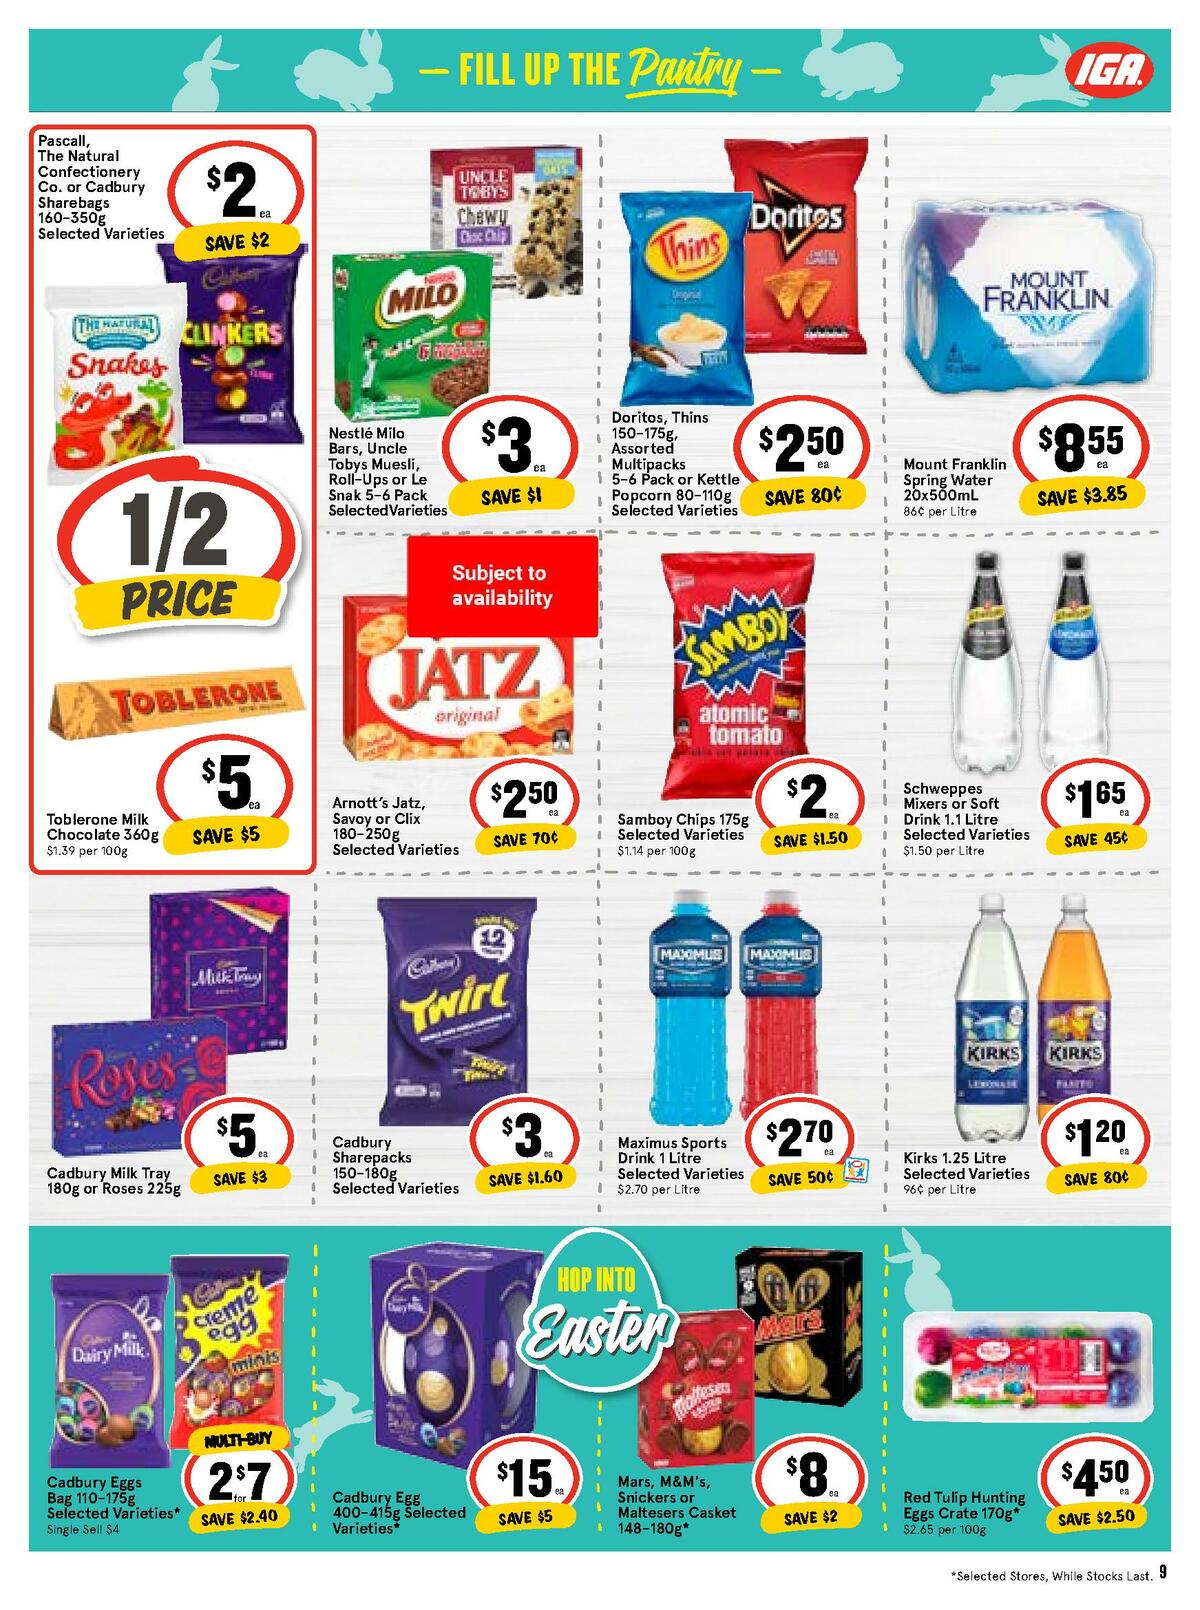 IGA Catalogues from 1 April